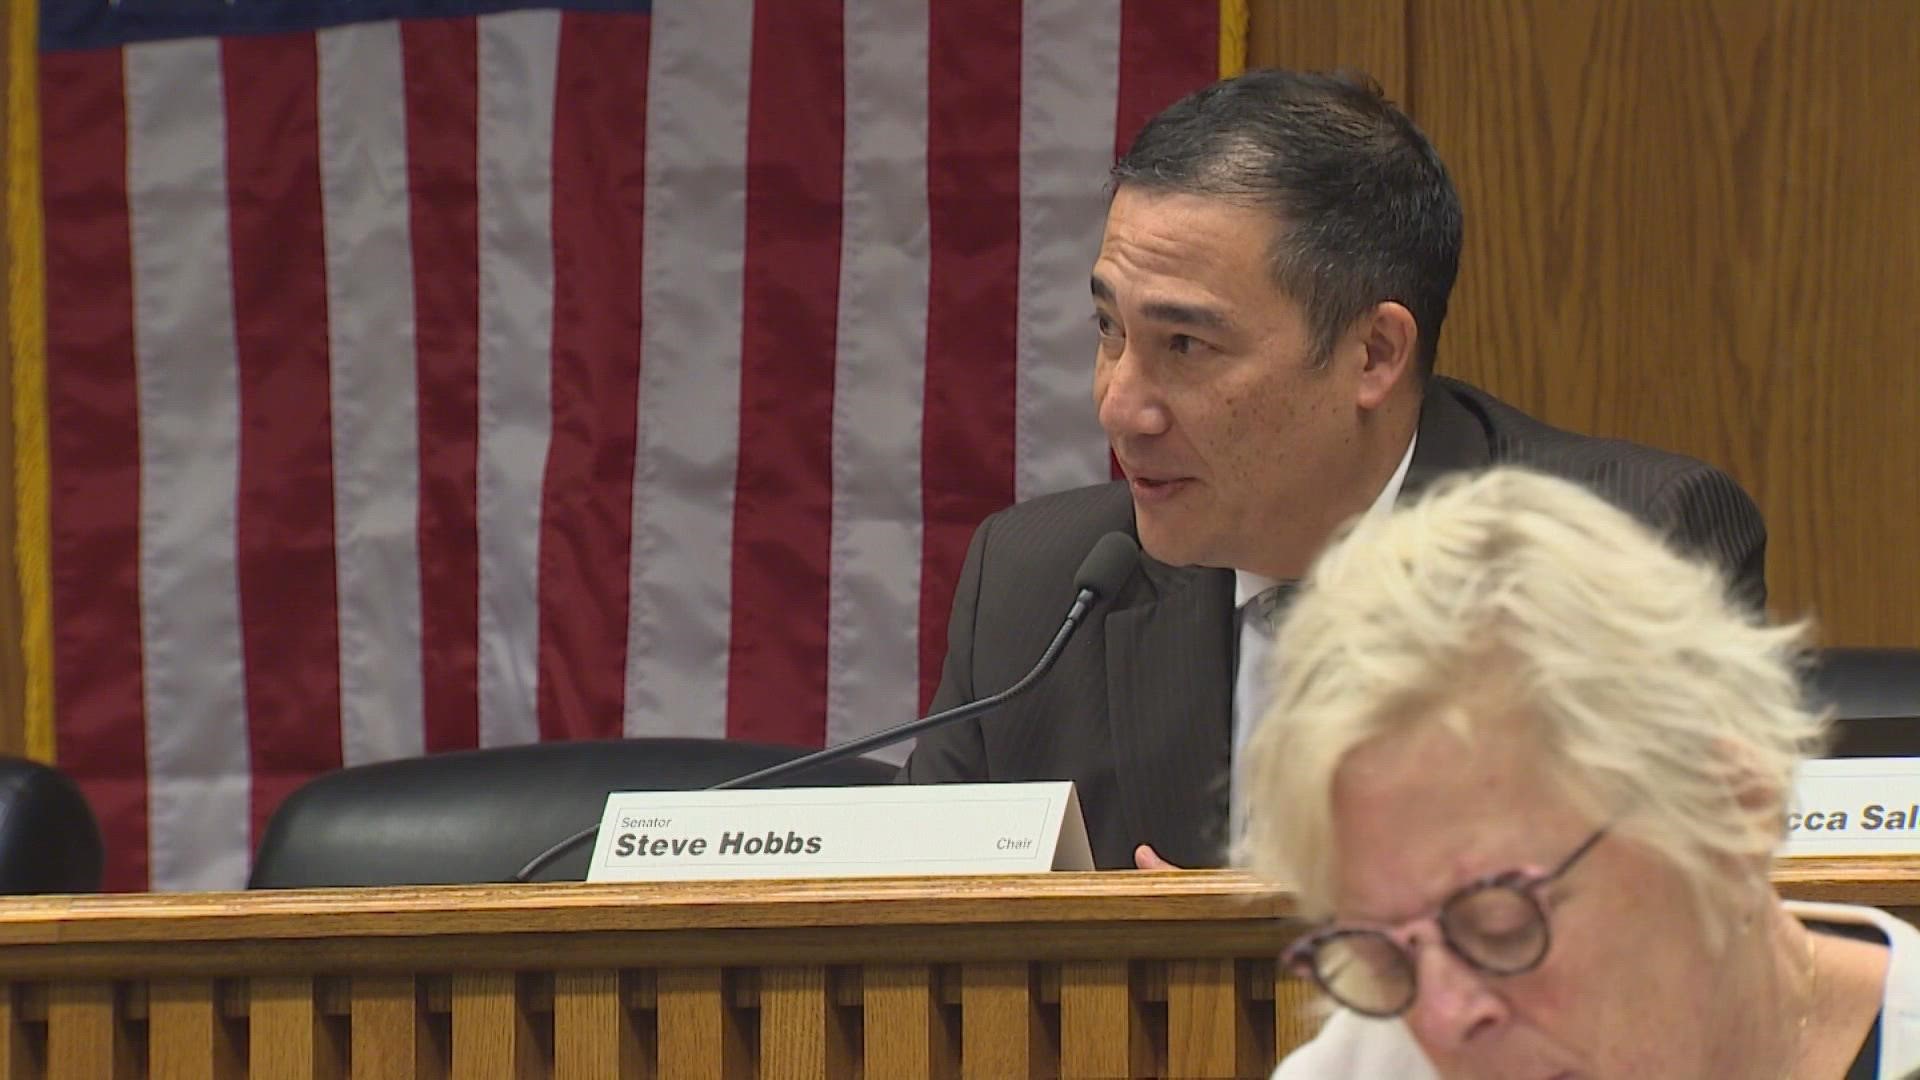 As an Asian-American, Steve Hobbs will be the first person of color to serve as Washington’s secretary of state.